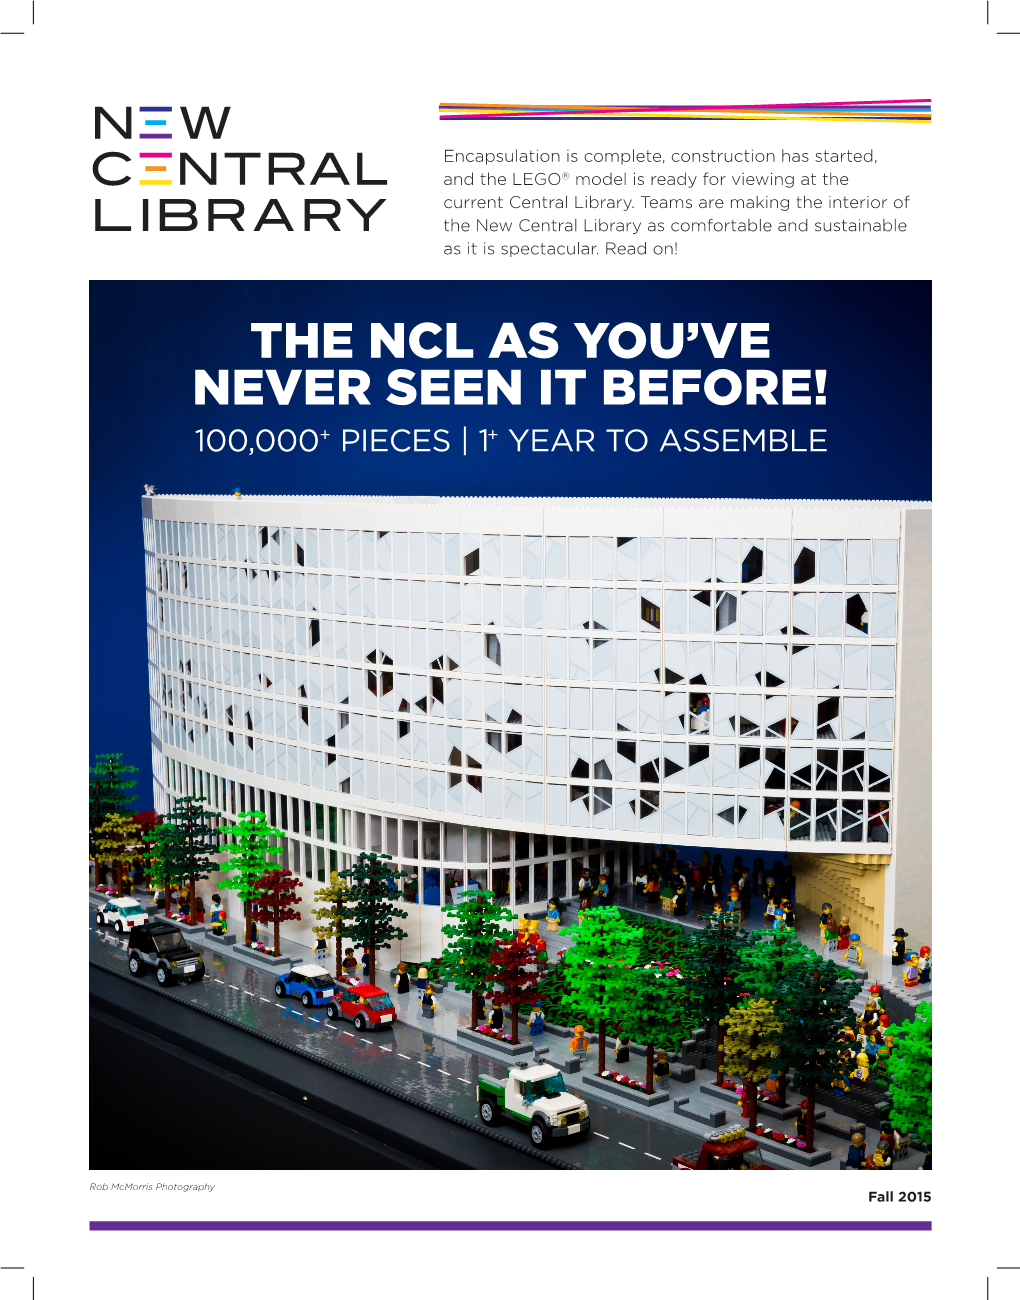 The Ncl As You've Never Seen It Before!